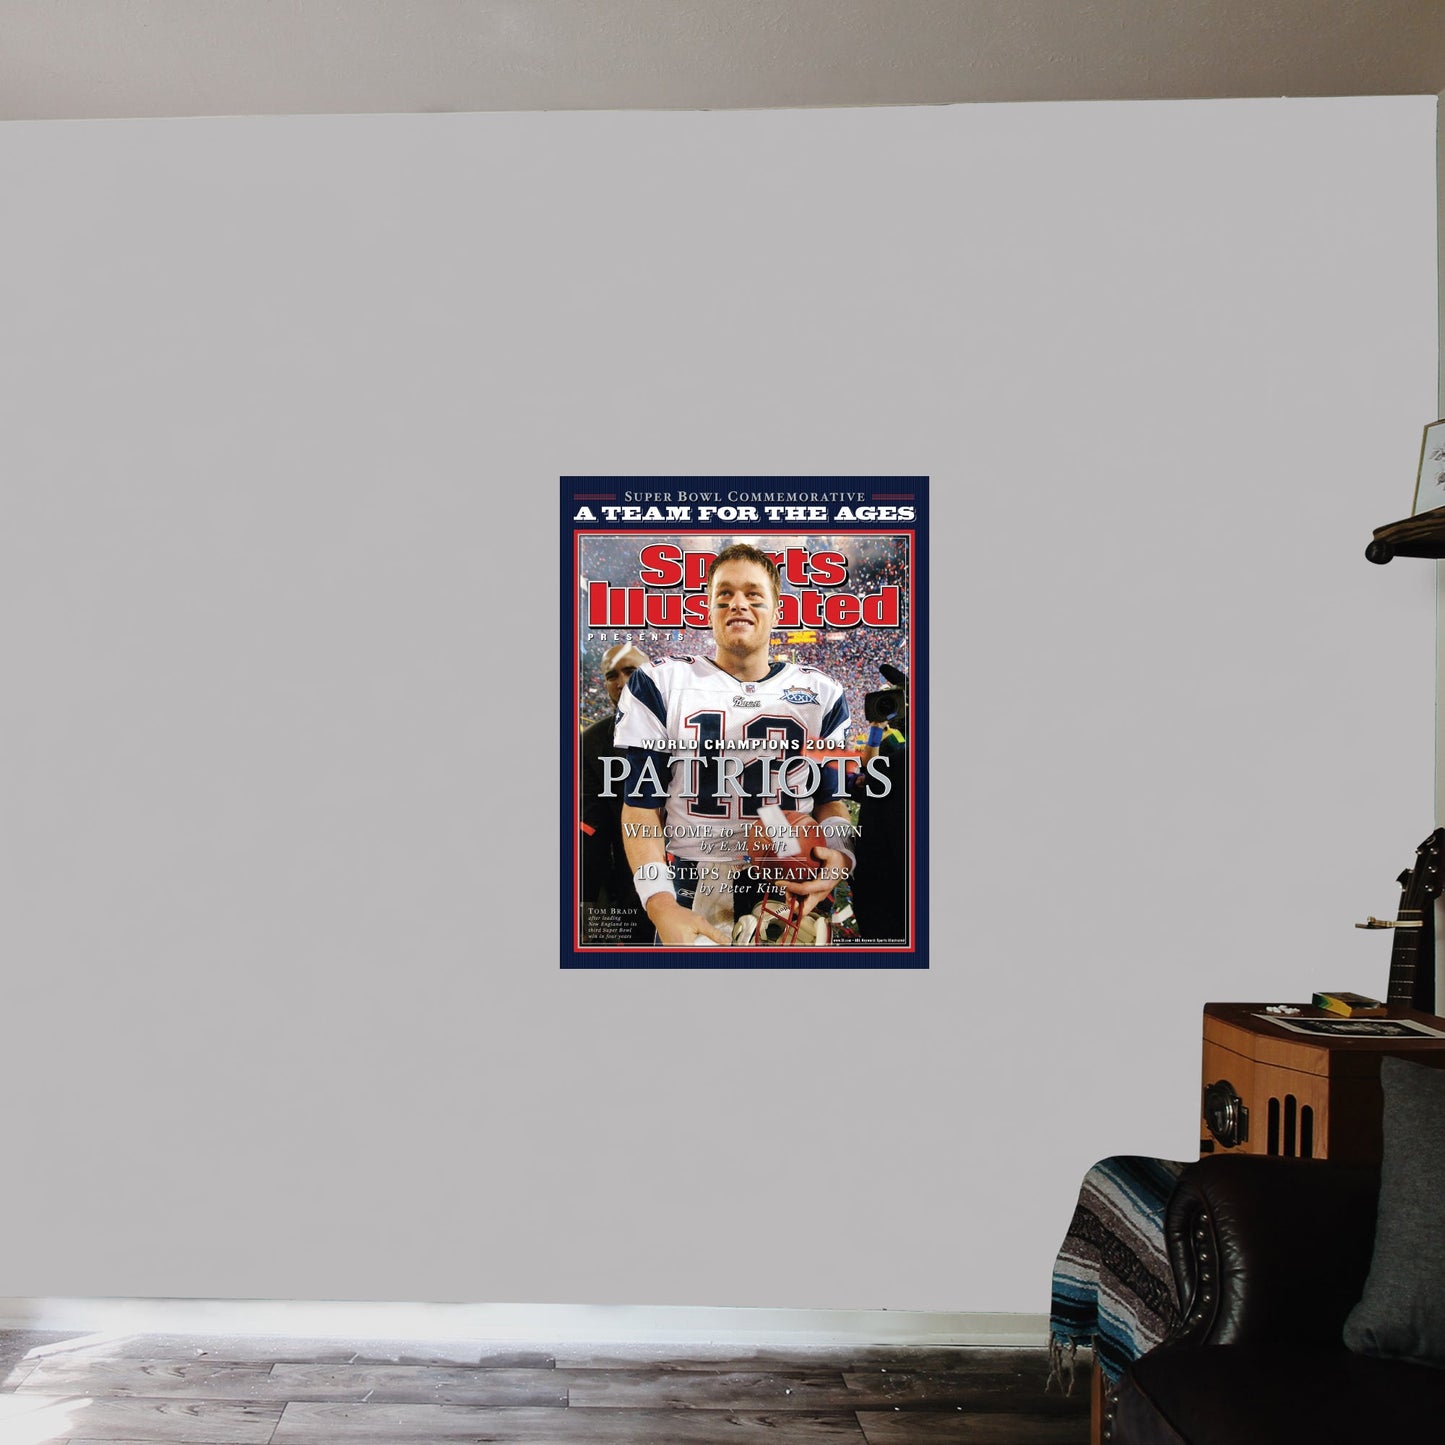 New England Patriots: Tom Brady Februrary 2005 Super Bowl XXXIX Commemorative Sports Illustrated Cover - Officially Licensed NFL Removable Adhesive Decal